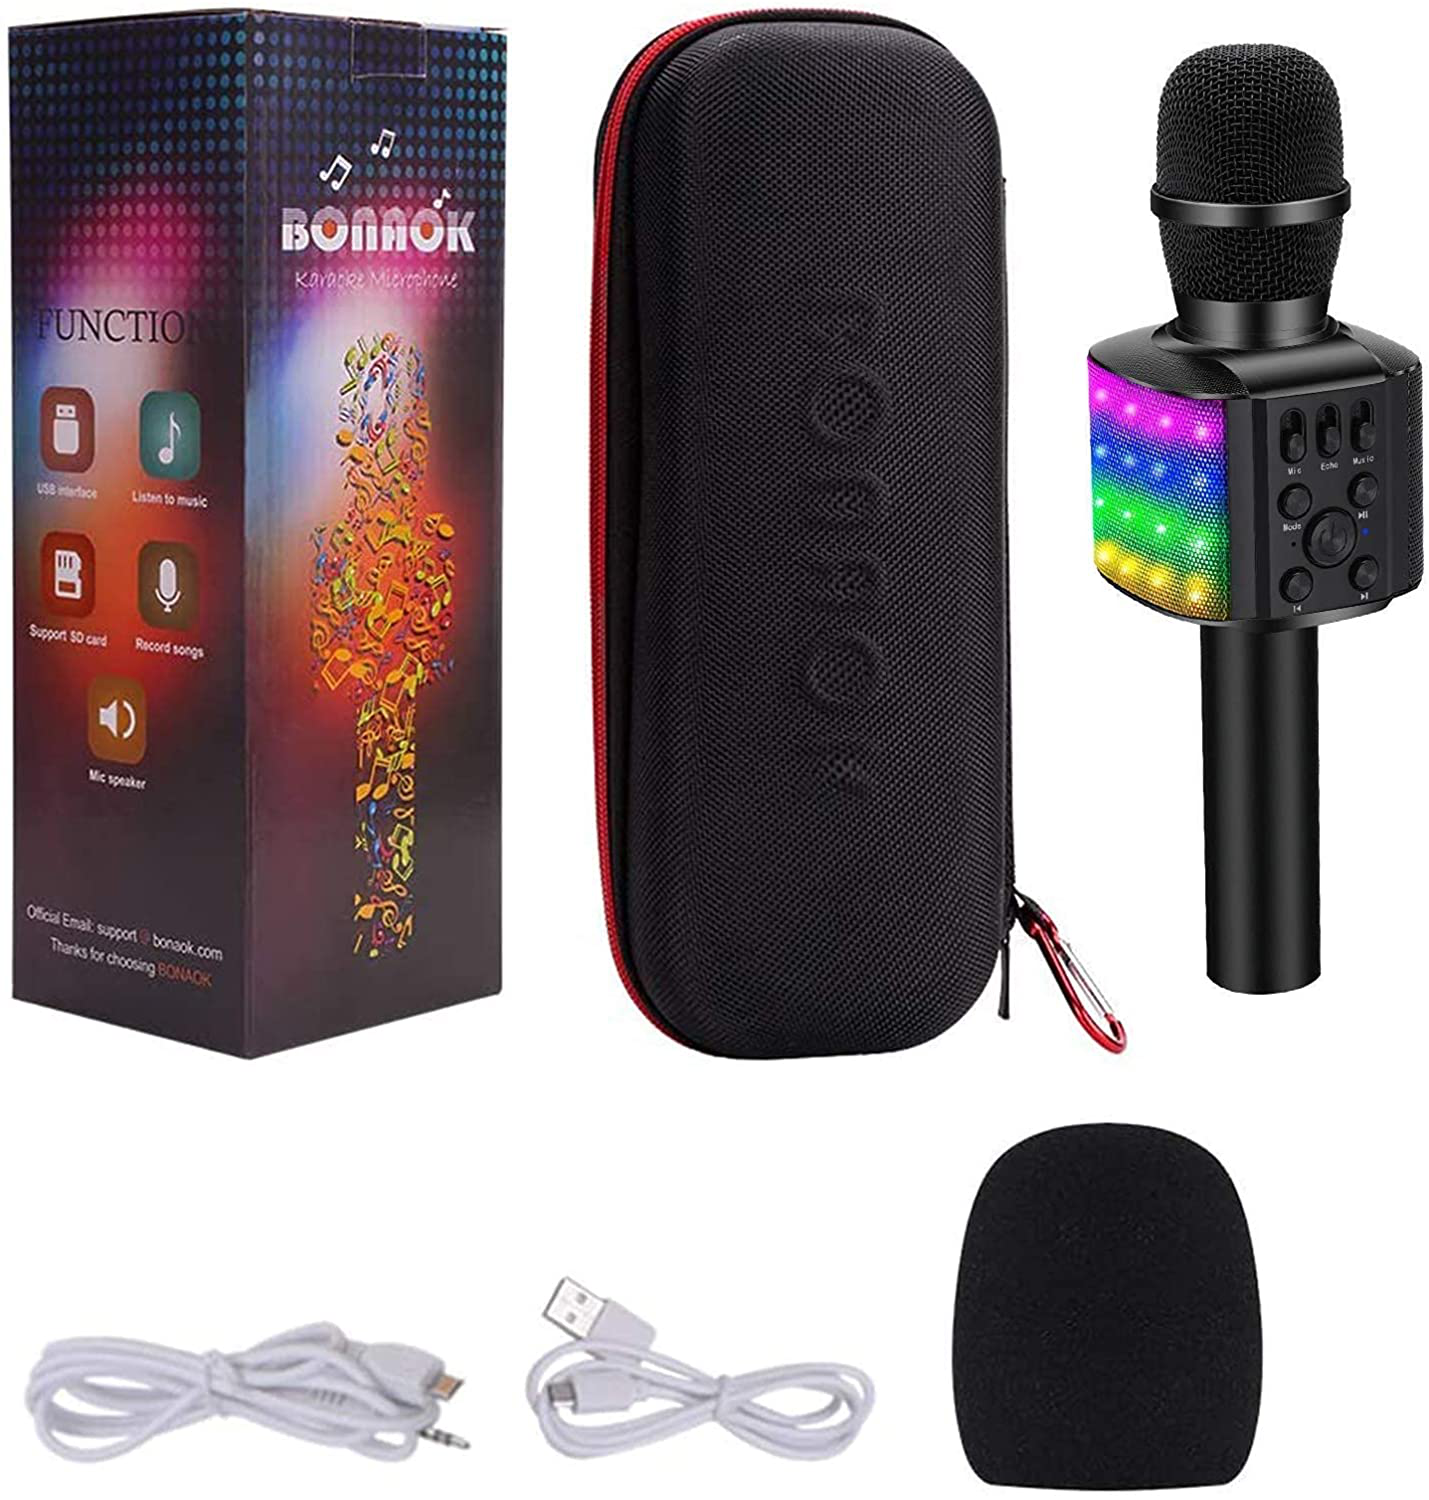 BONAOK Wireless Bluetooth Karaoke Microphone with controllable LED Lights, 4 in 1 Portable Karaoke Machine Mic Speaker Birthday Home Party for All Smartphones PC(Q36 Black)